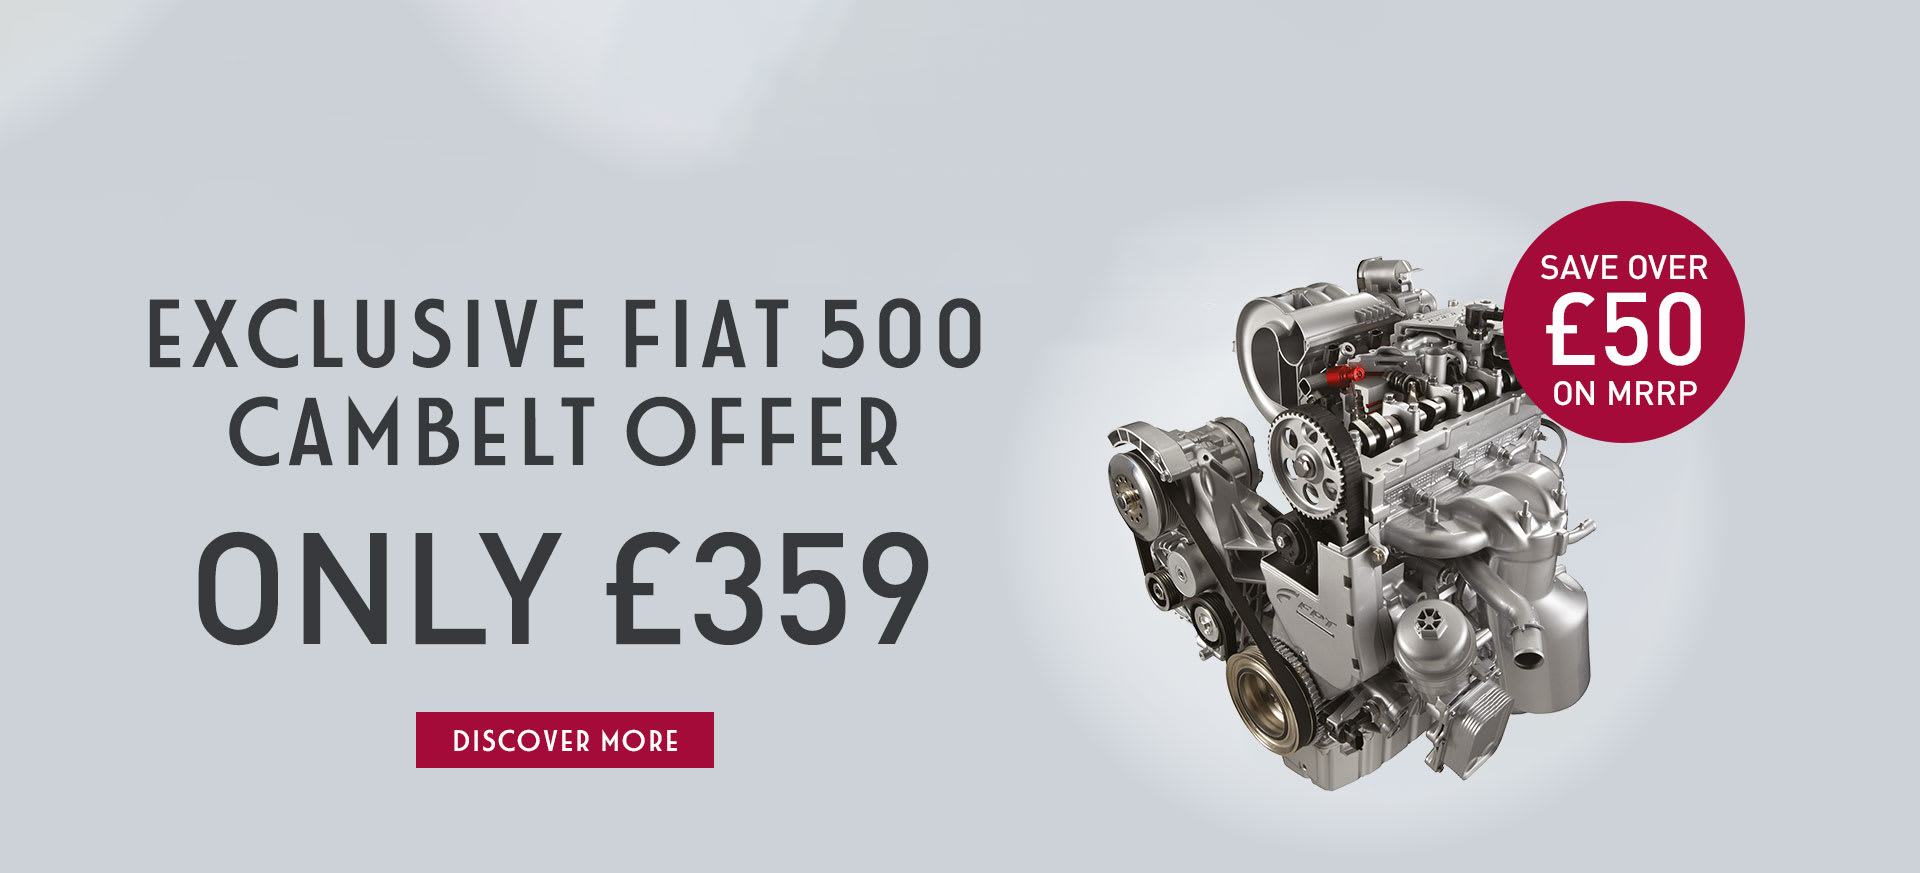 Exclusive Fiat 500 Cambelt Offer